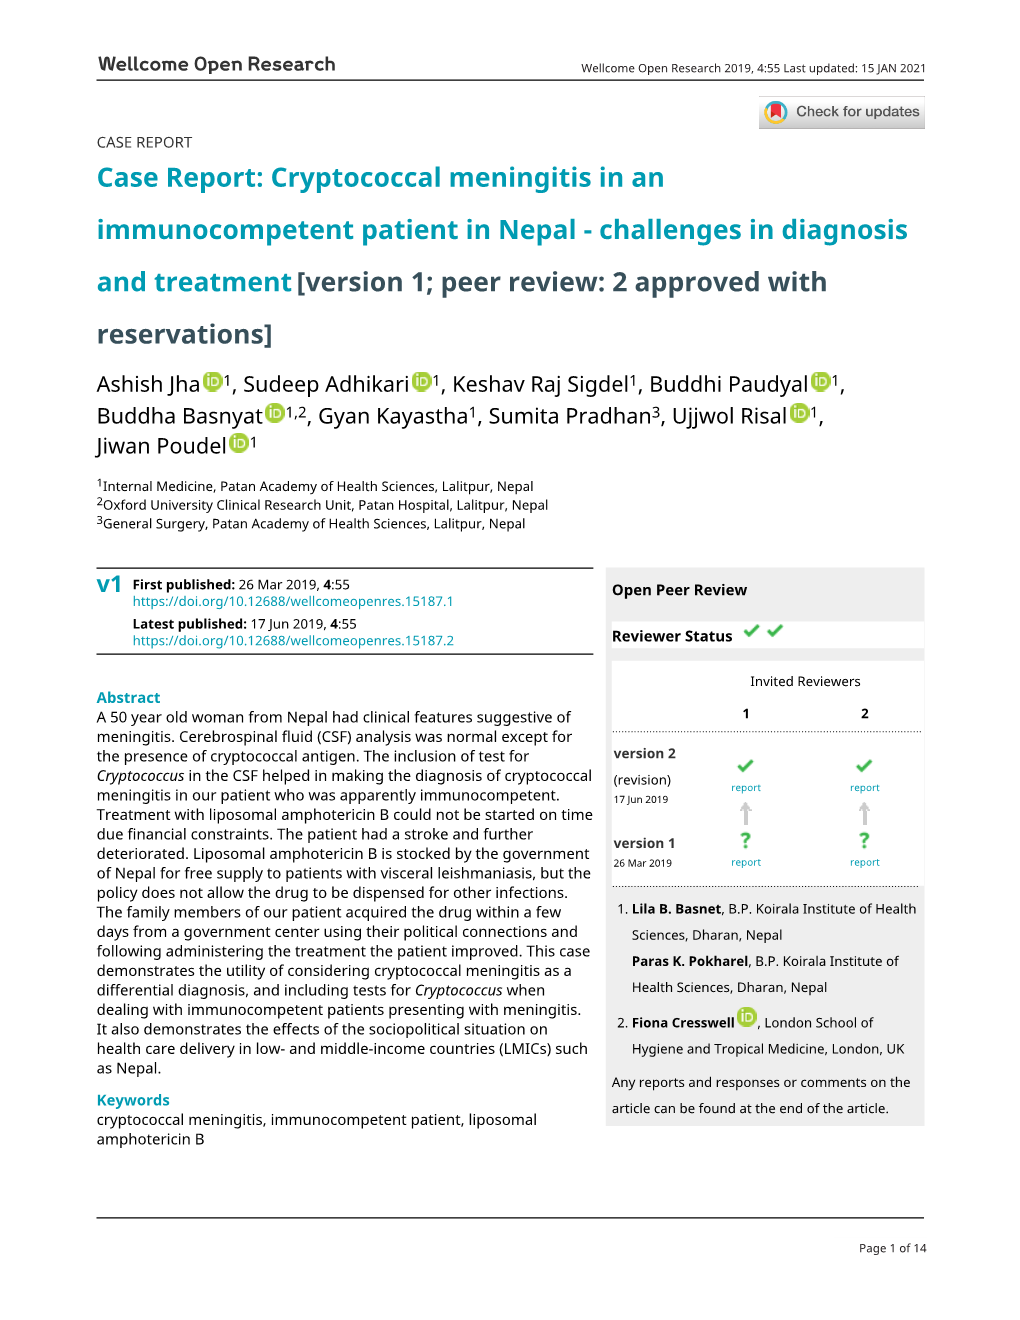 Cryptococcal Meningitis in an Immunocompetent Patient in Nepal - Challenges in Diagnosis and Treatment [Version 1; Peer Review: 2 Approved with Reservations]